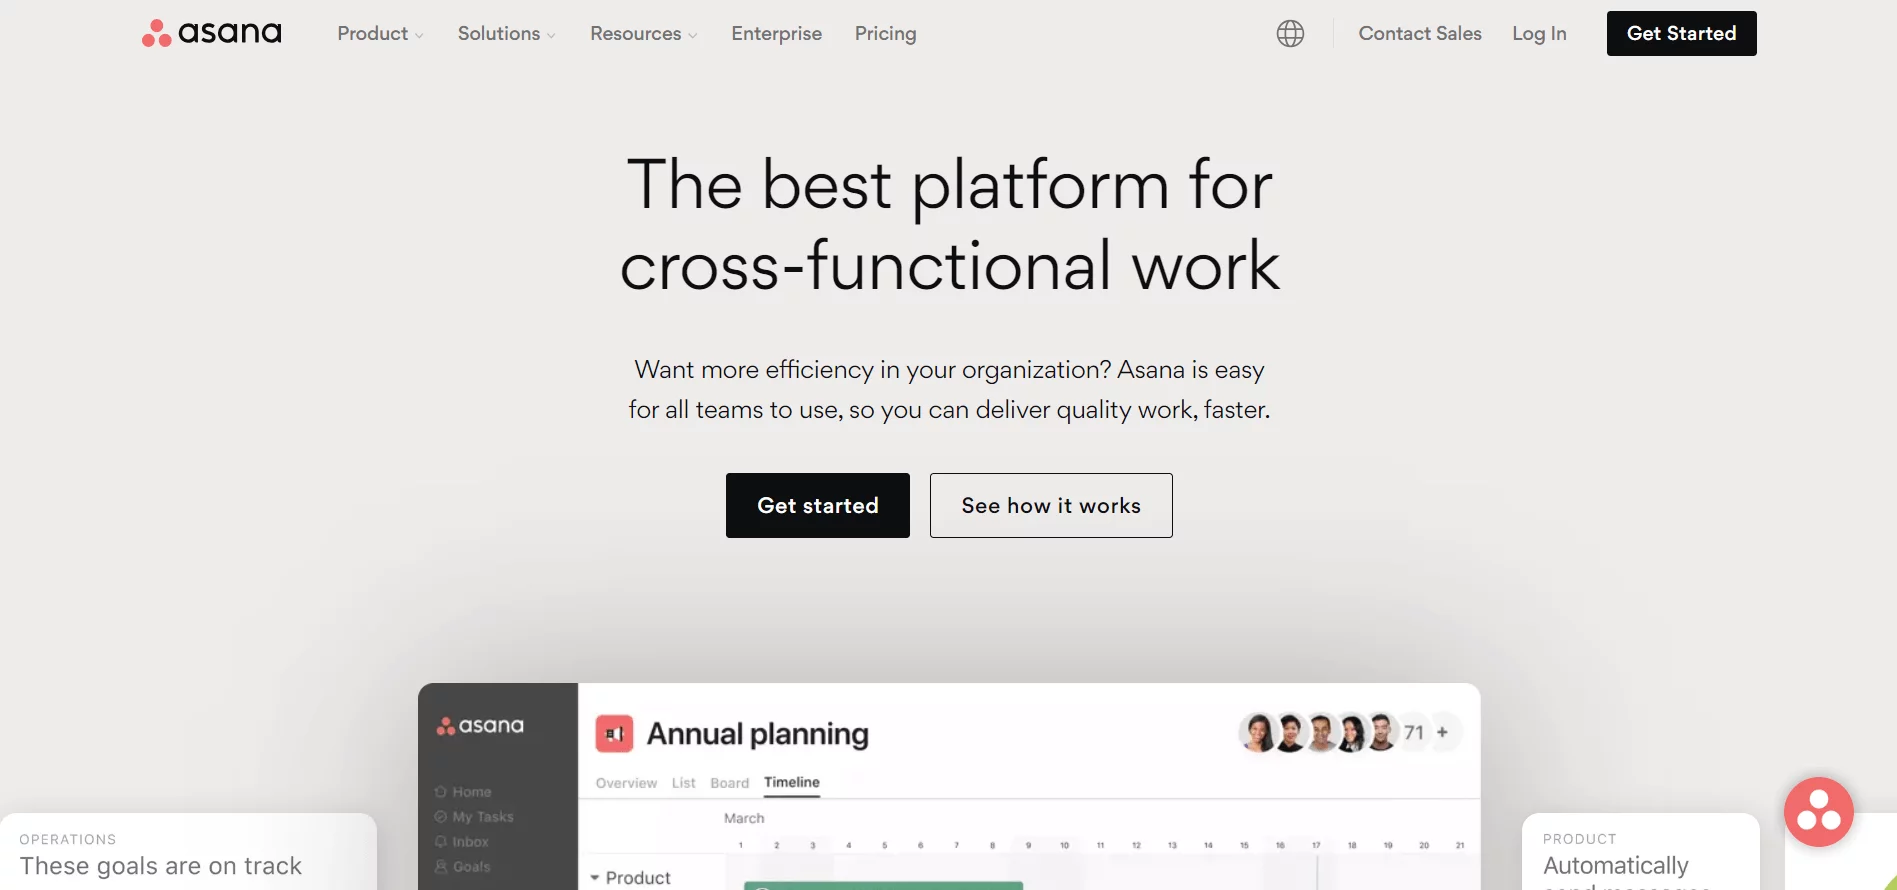 Asana simple homepage showing the motto "The best platform for cross-functional work"